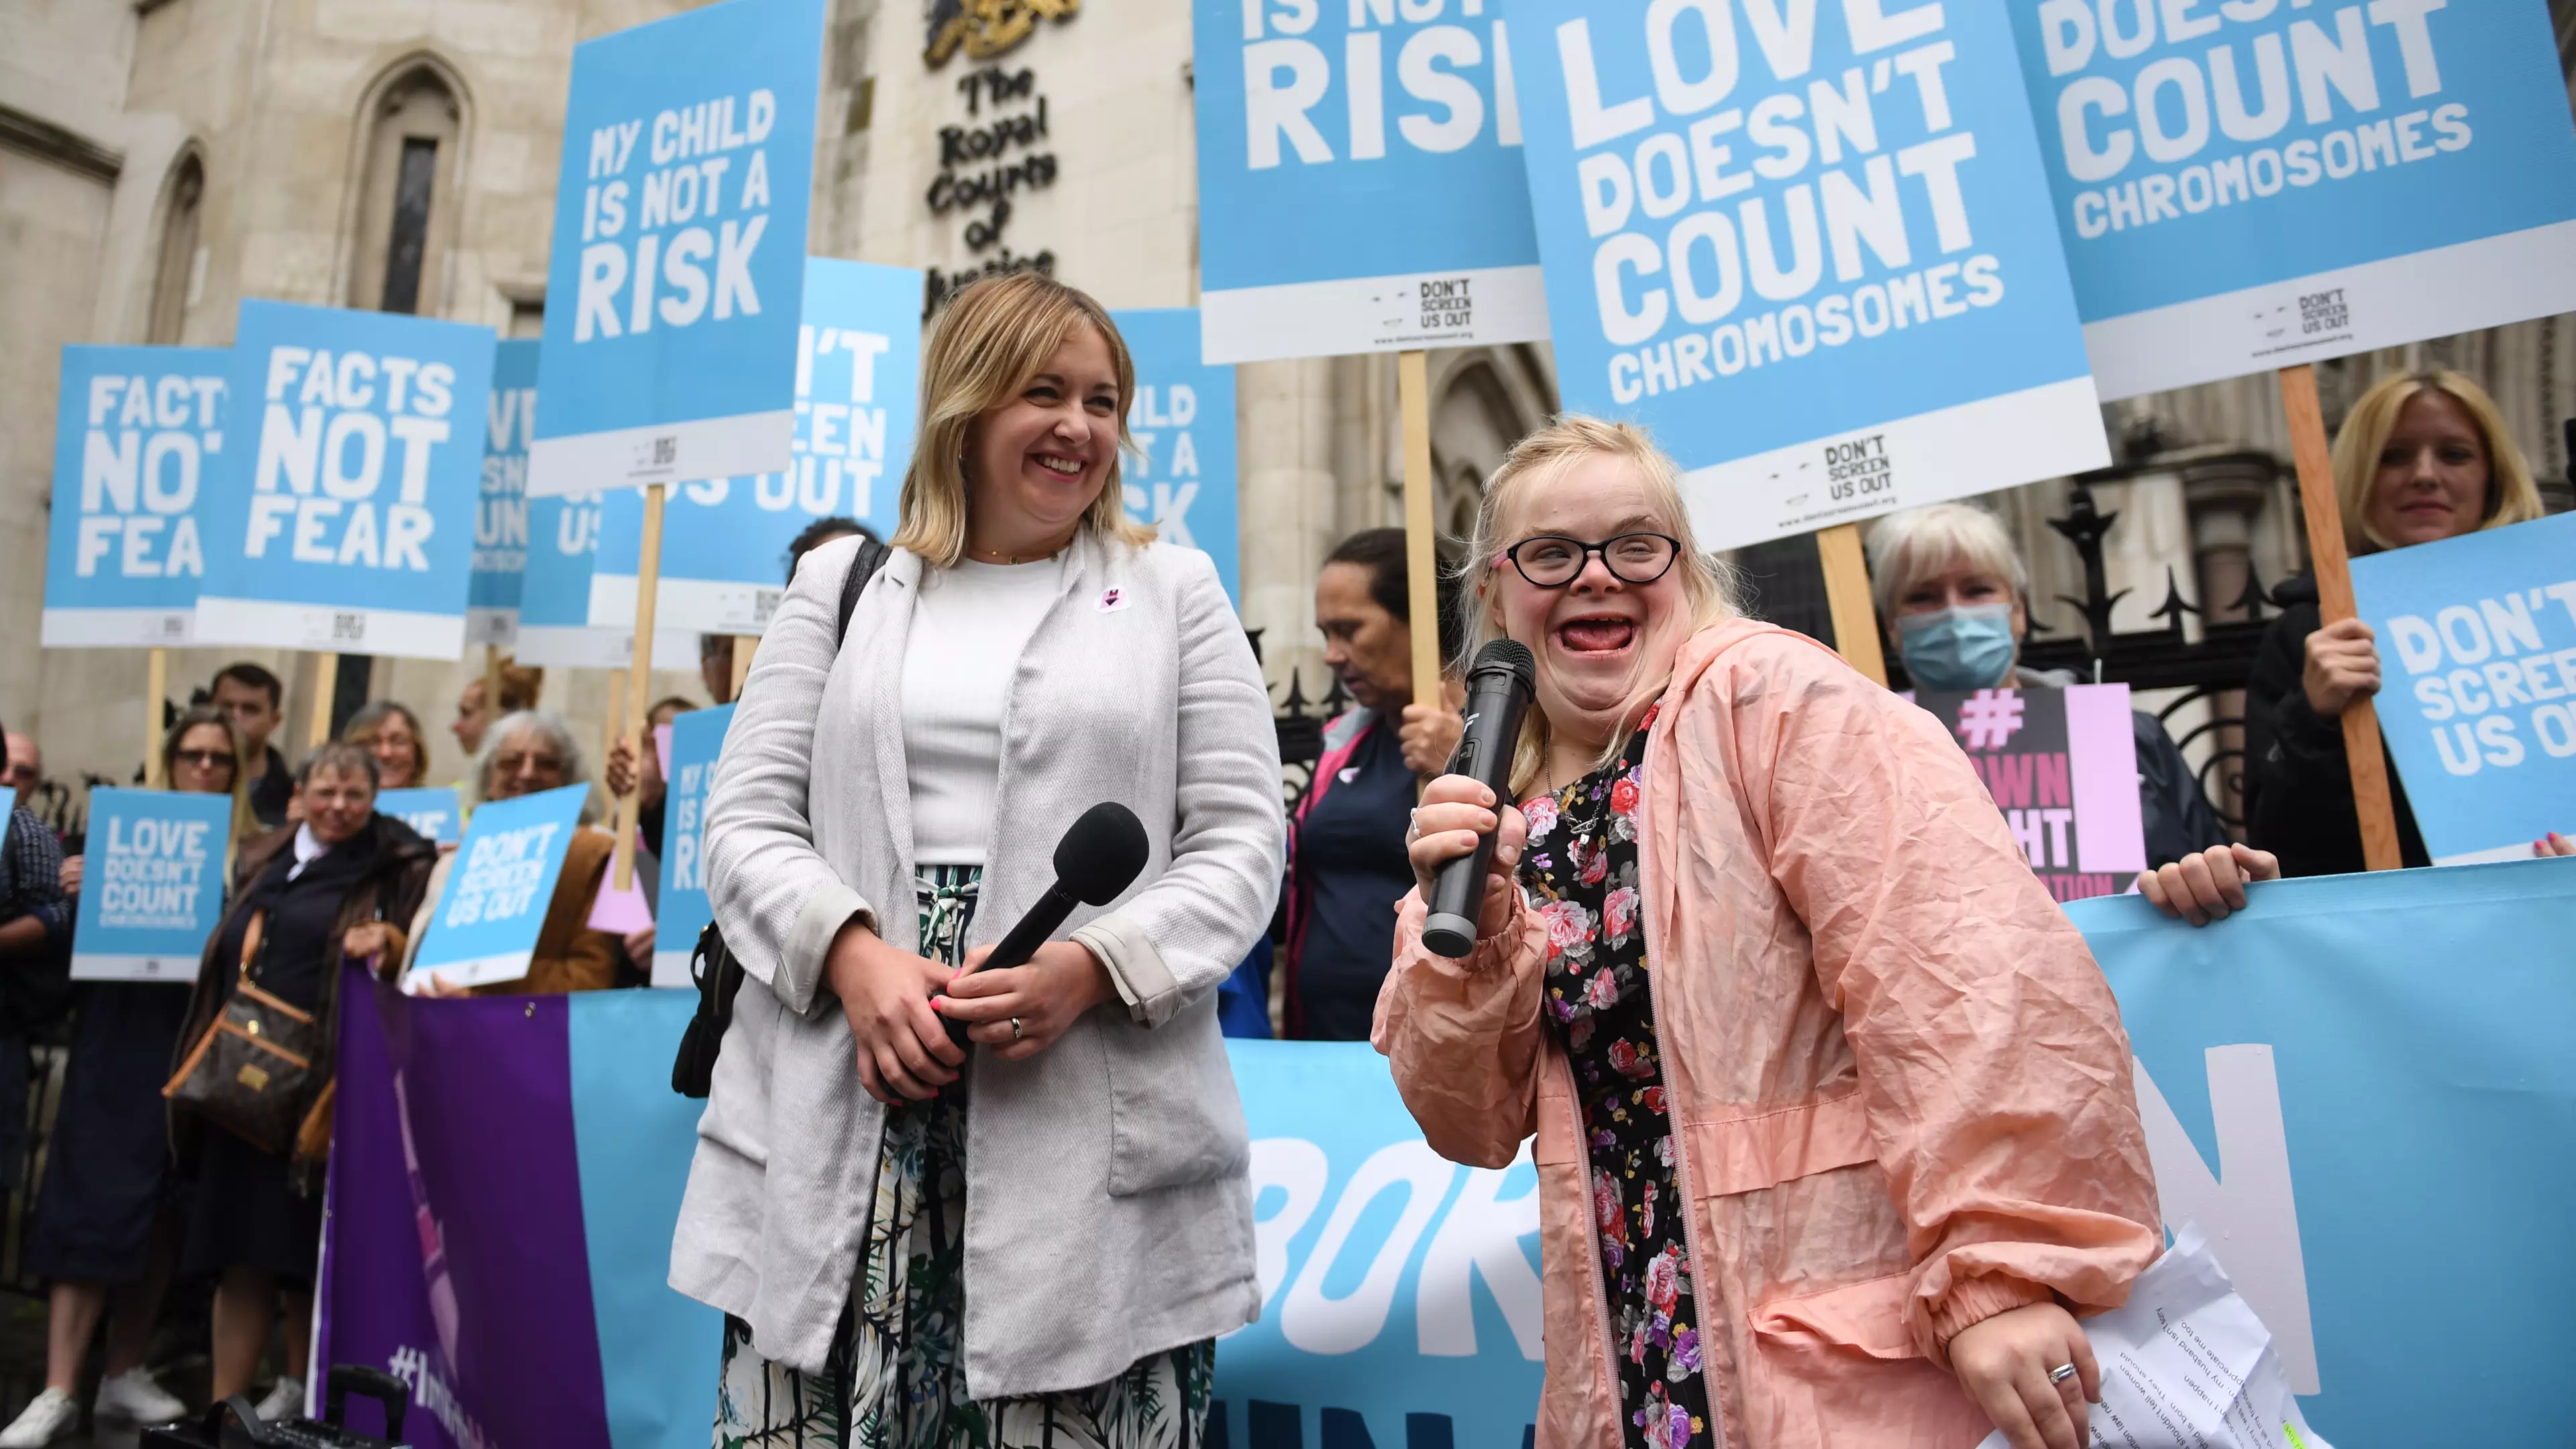 Woman With Down's Syndrome Is Fighting 'Demeaning' Abortion Law